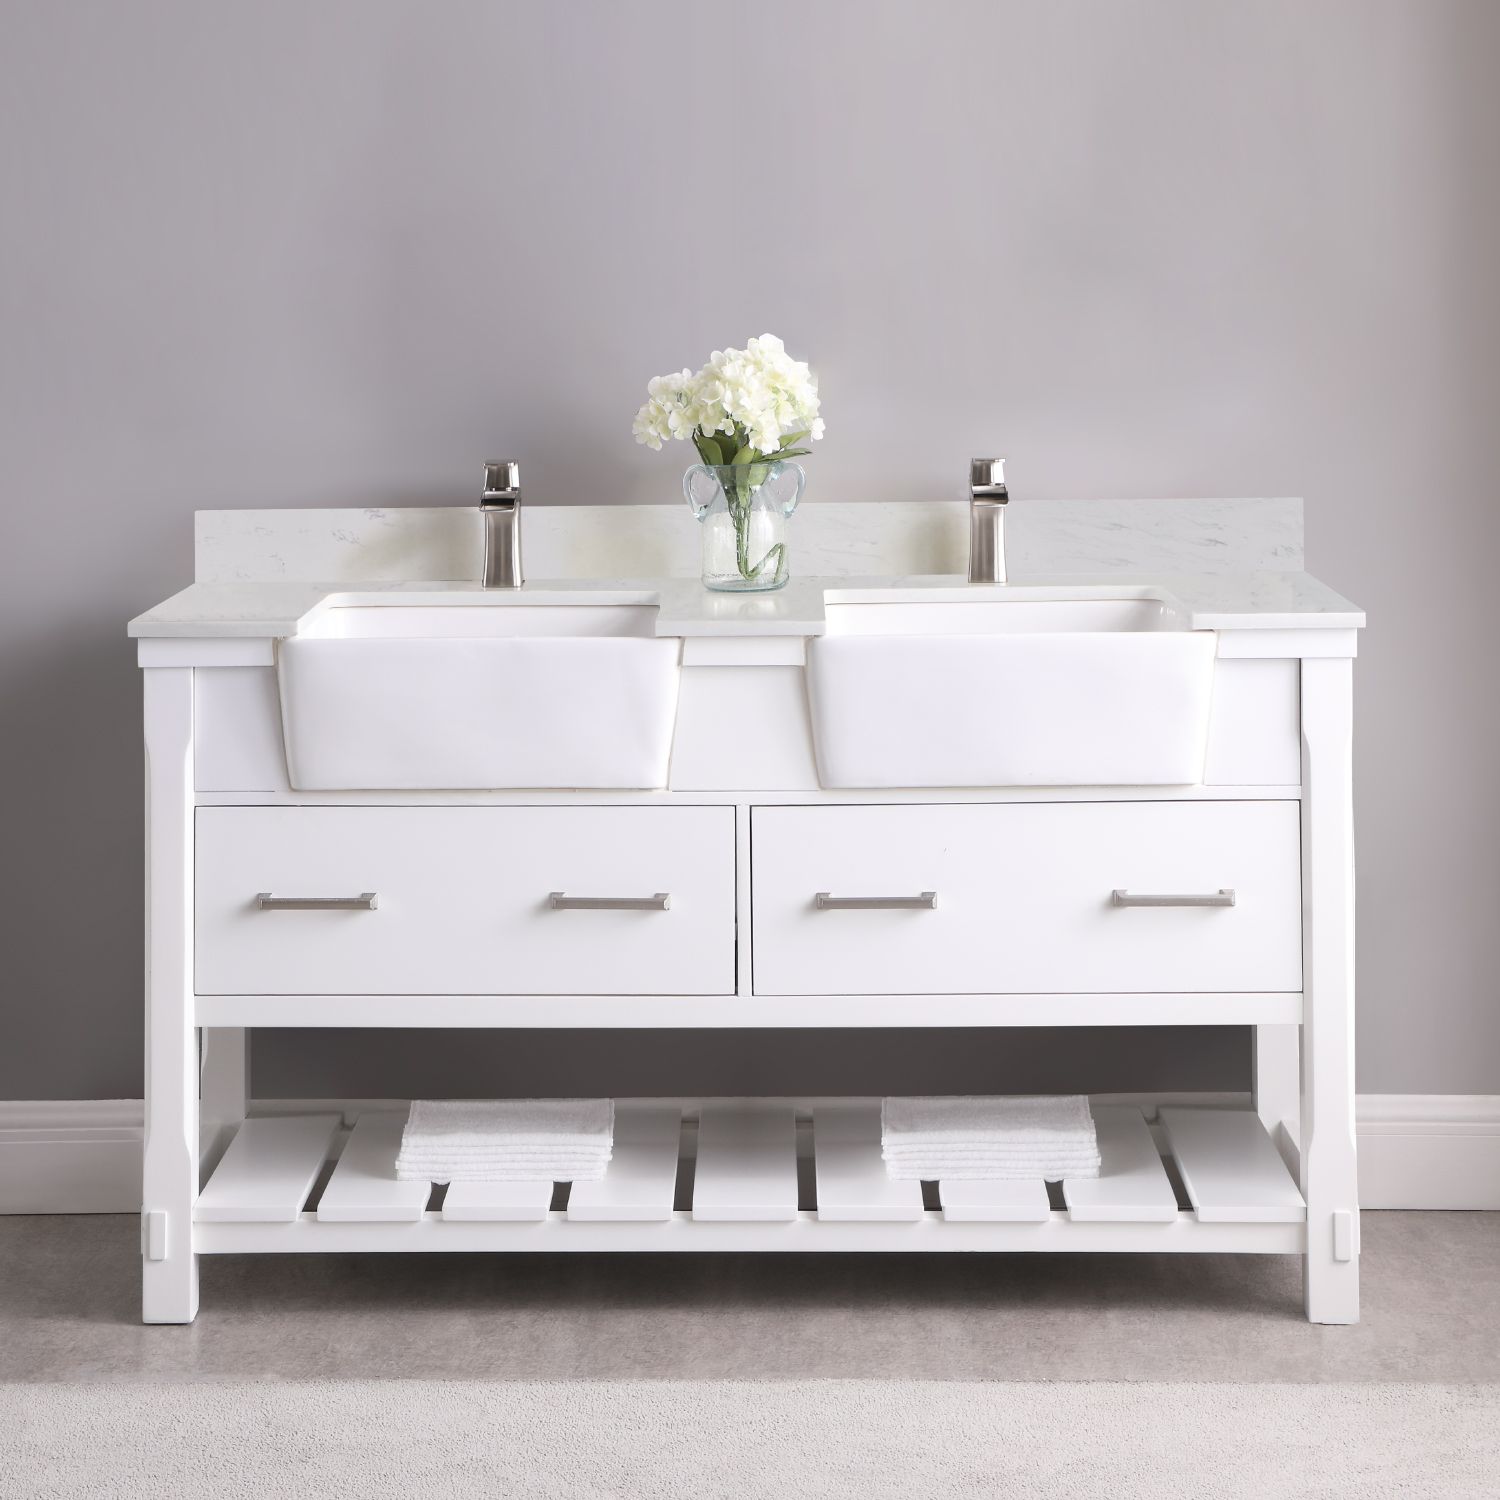 Issac Edwards Collection 60" Double Bathroom Vanity Set in White and Composite Carrara White Stone Top with White Farmhouse Basin without Mirror